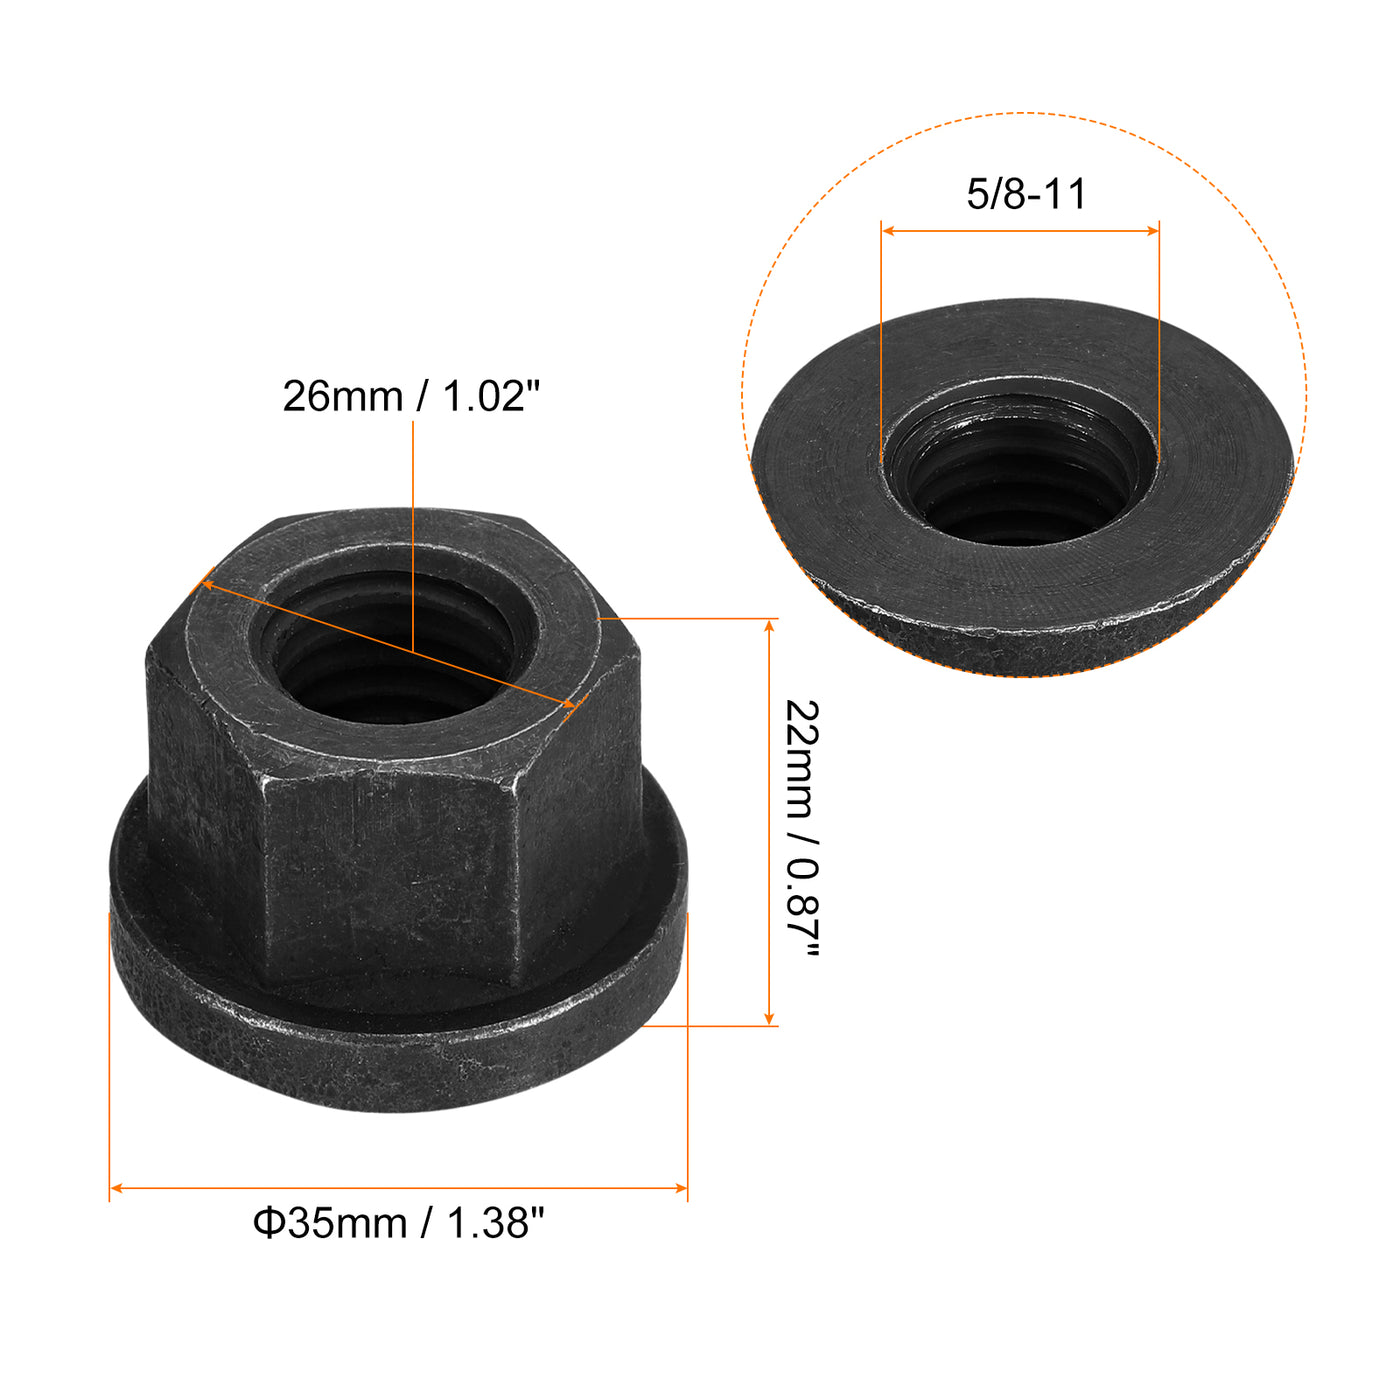 uxcell Uxcell 5/8-11 Flange Hex Lock Nuts, 2pcs Grade 10.9 Carbon Steel Hex Flange Nuts